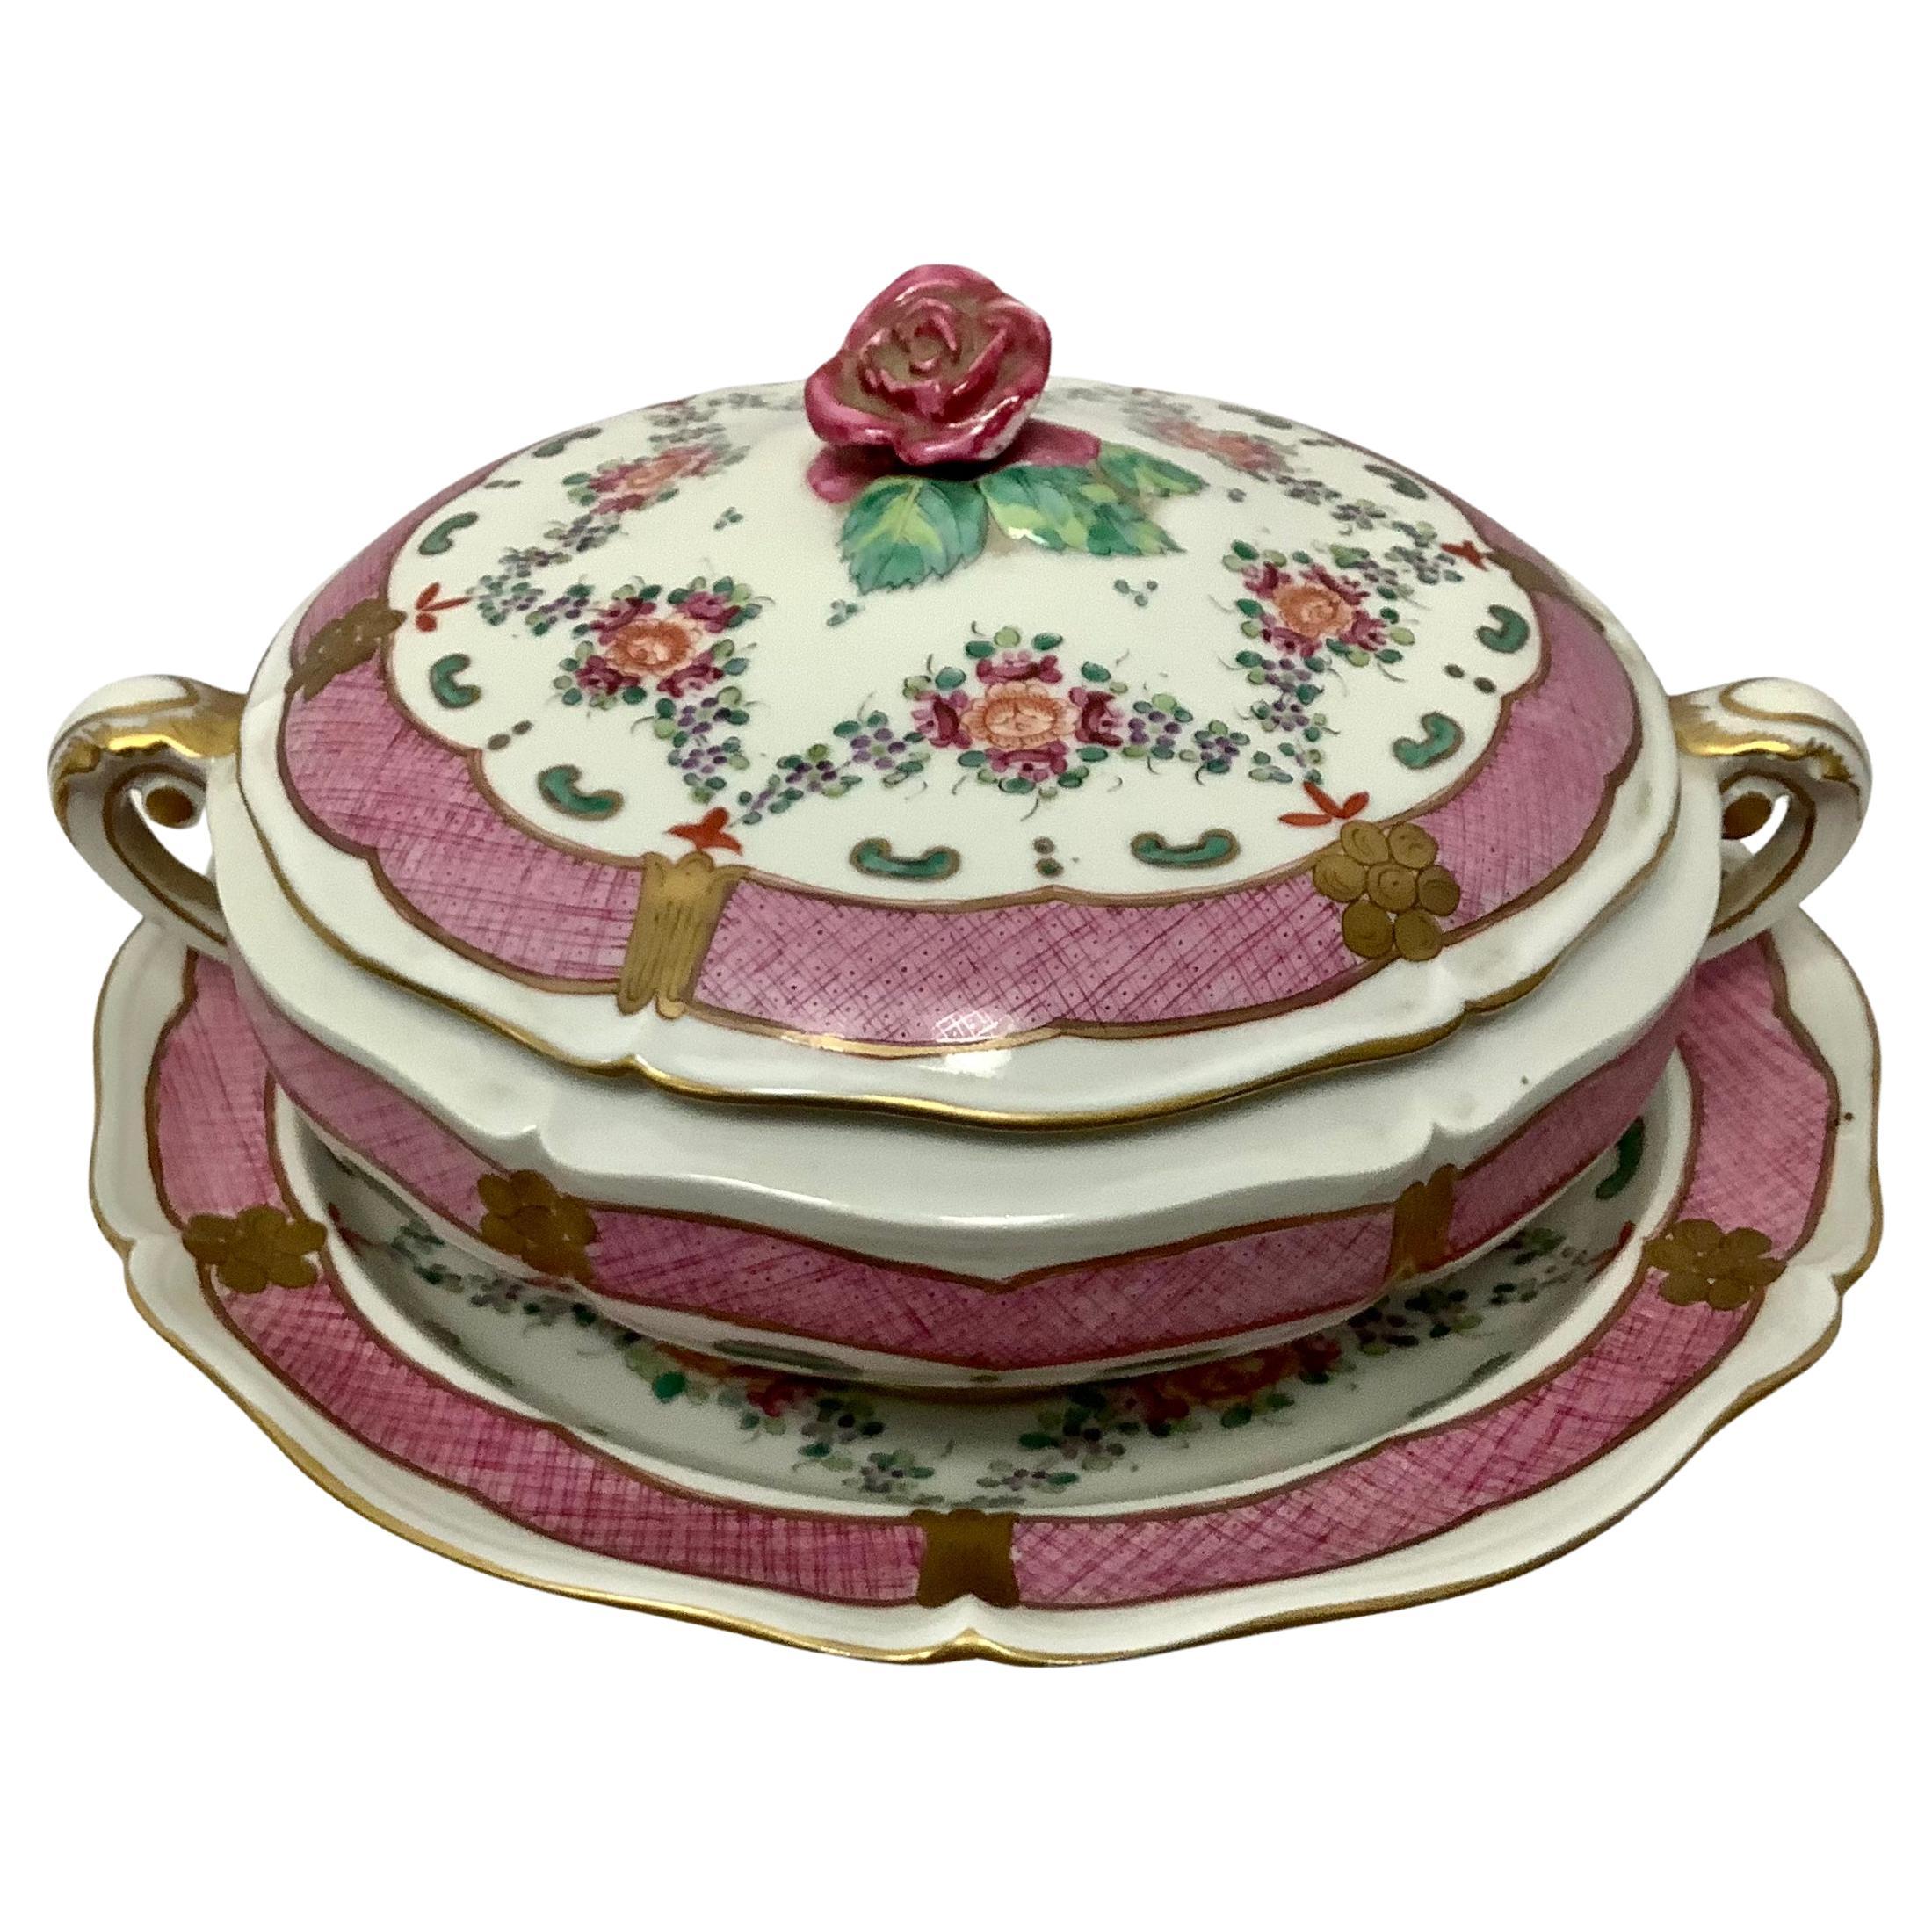 Sampson Large Covered Tureen with Under-Plate